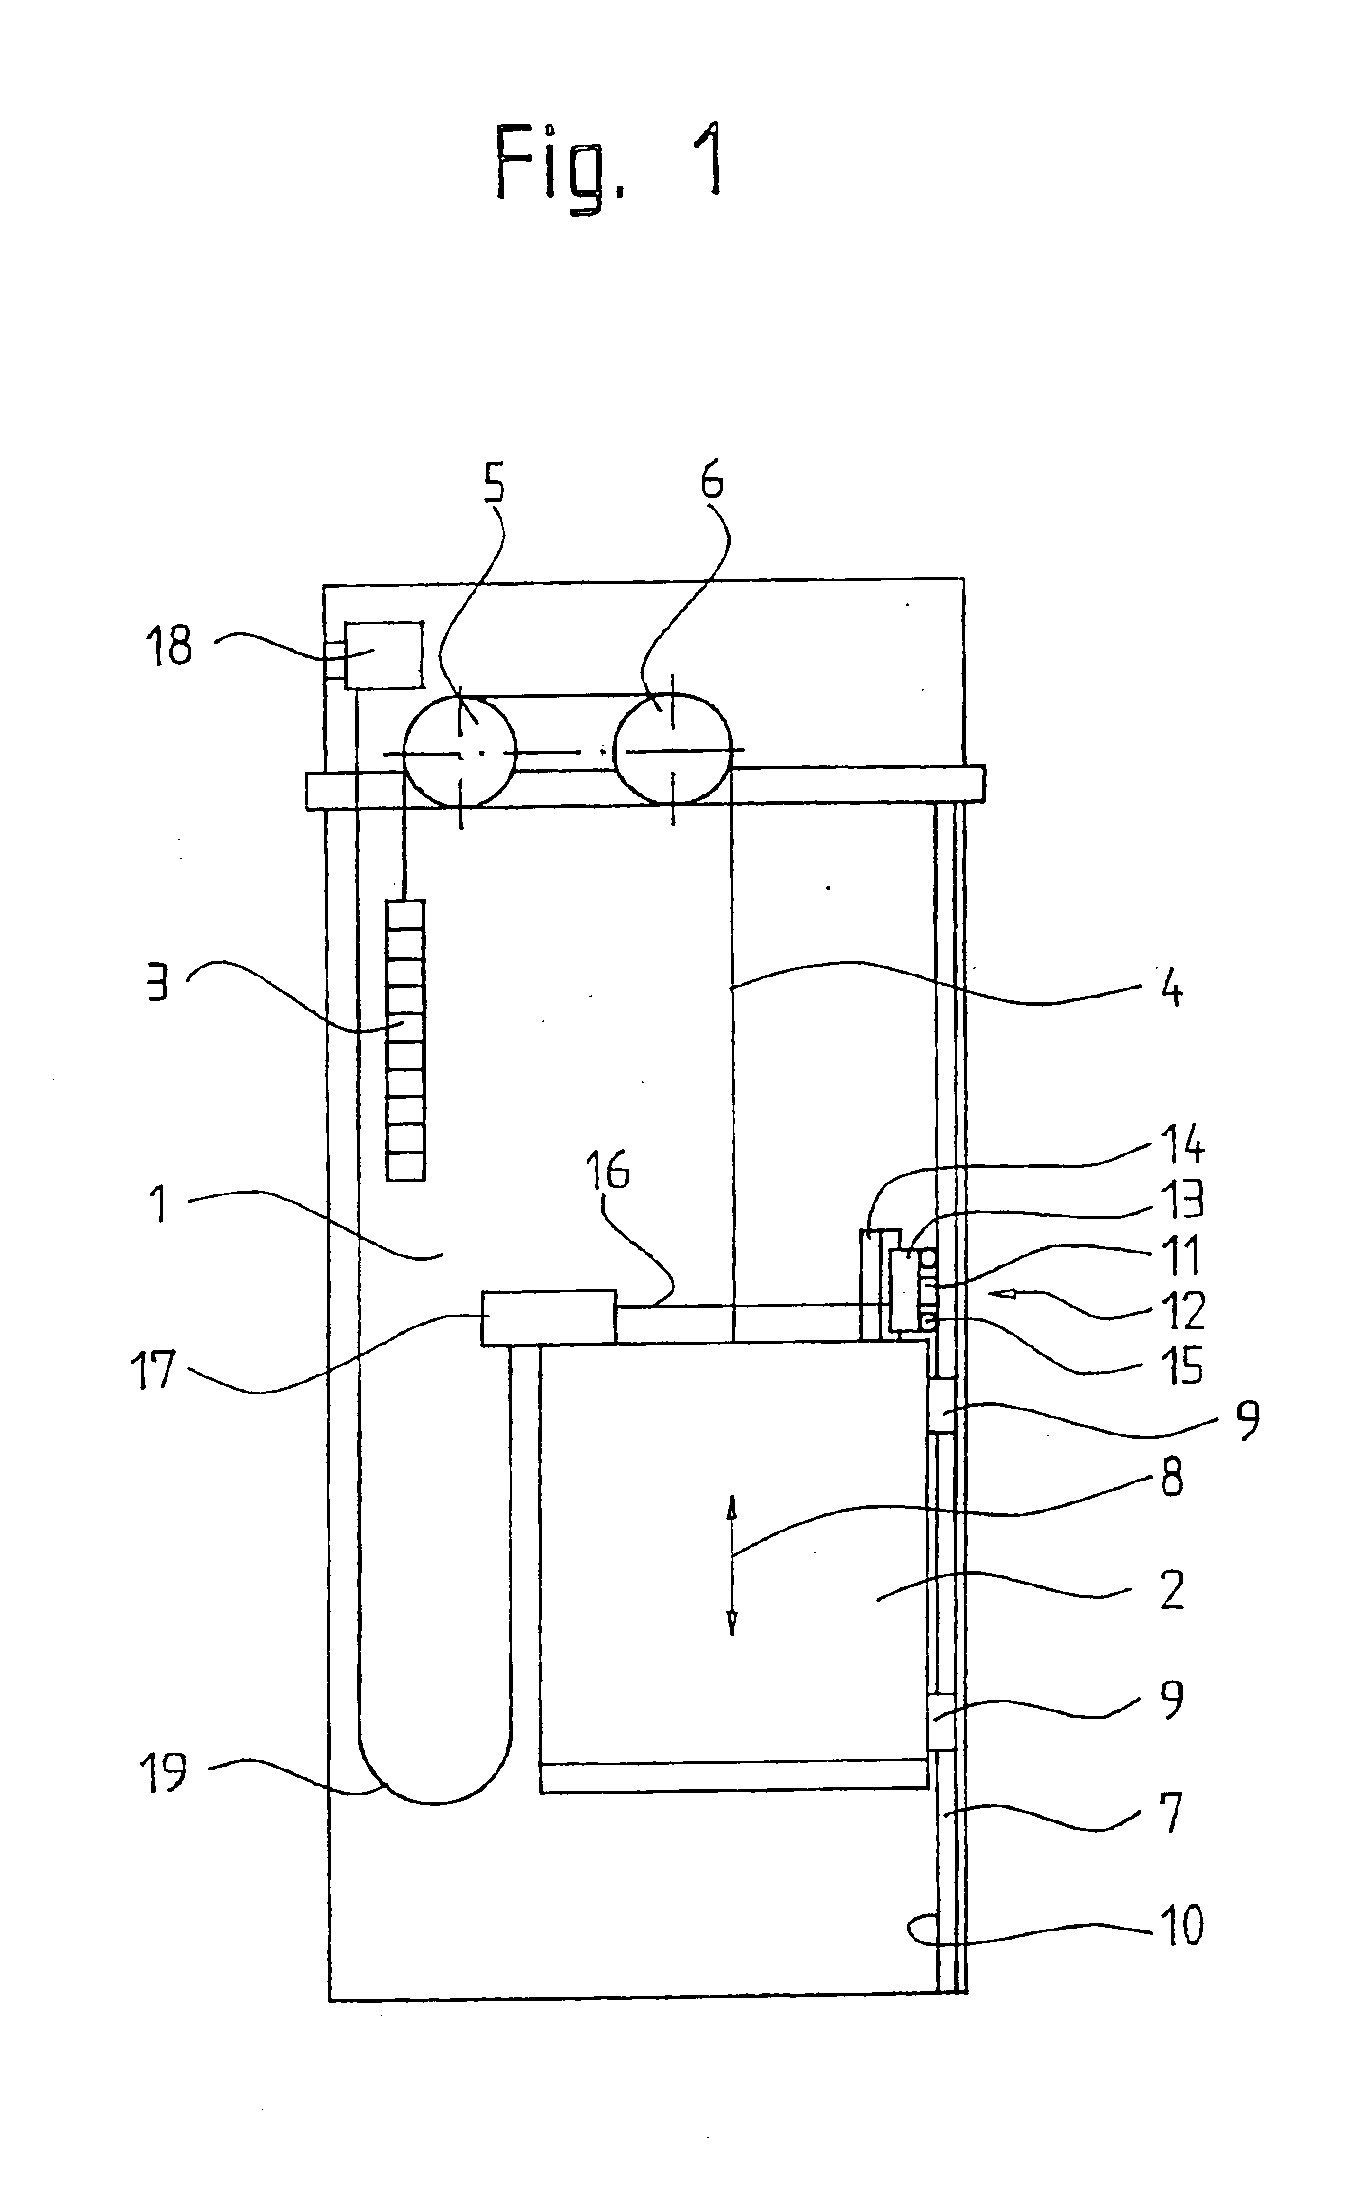 Elevator installation with a measuring system for determining absolute car position